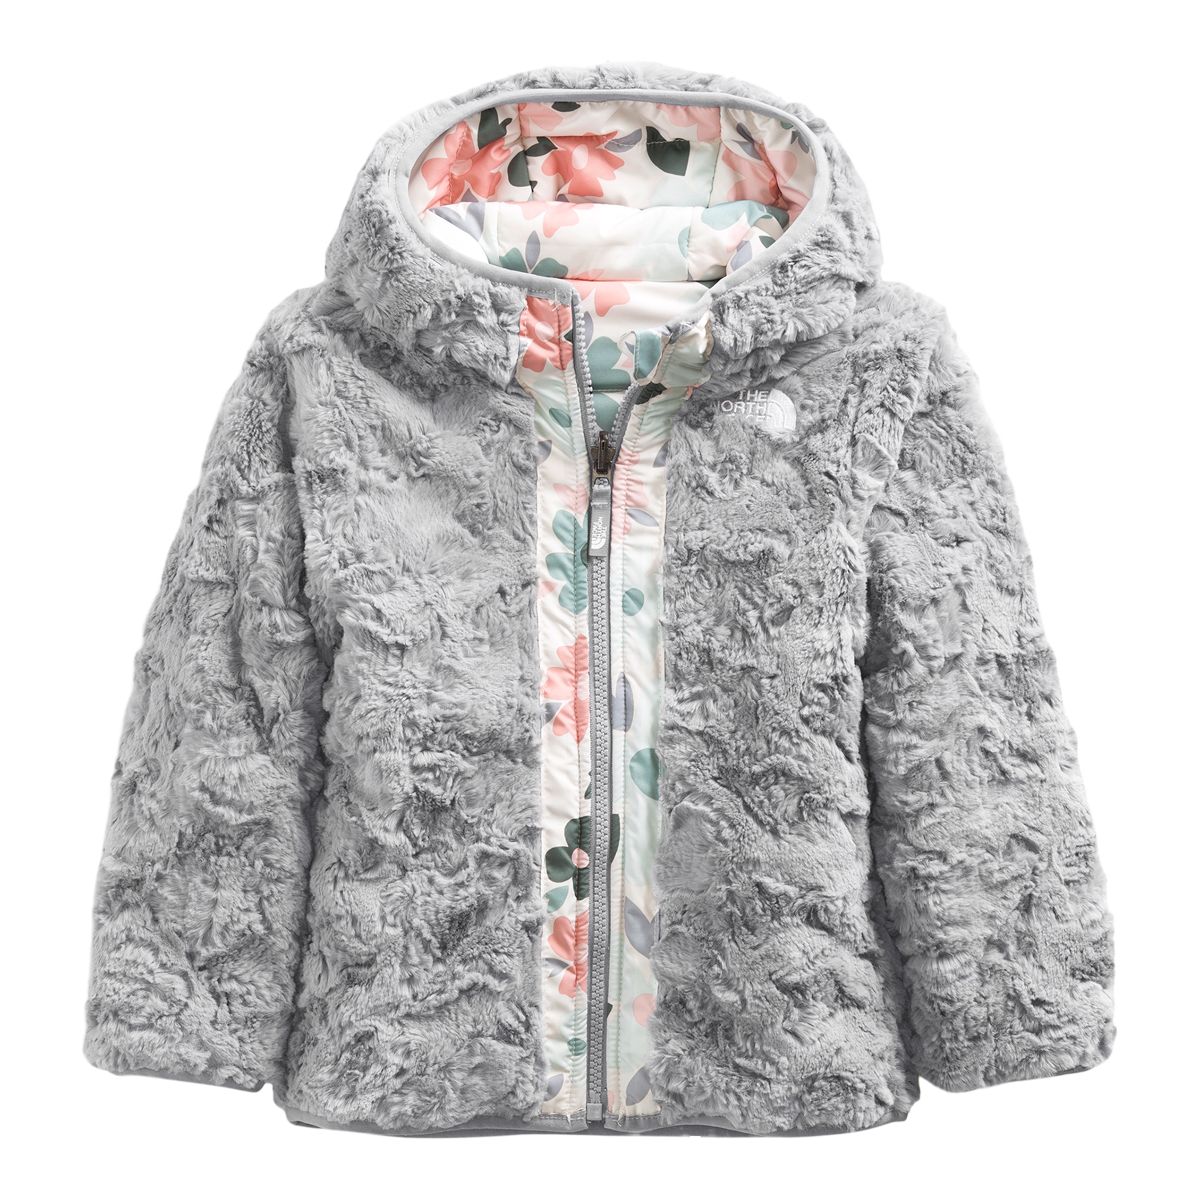 The North Face Toddler Girls' Mossbud Swirl Reversible Jacket